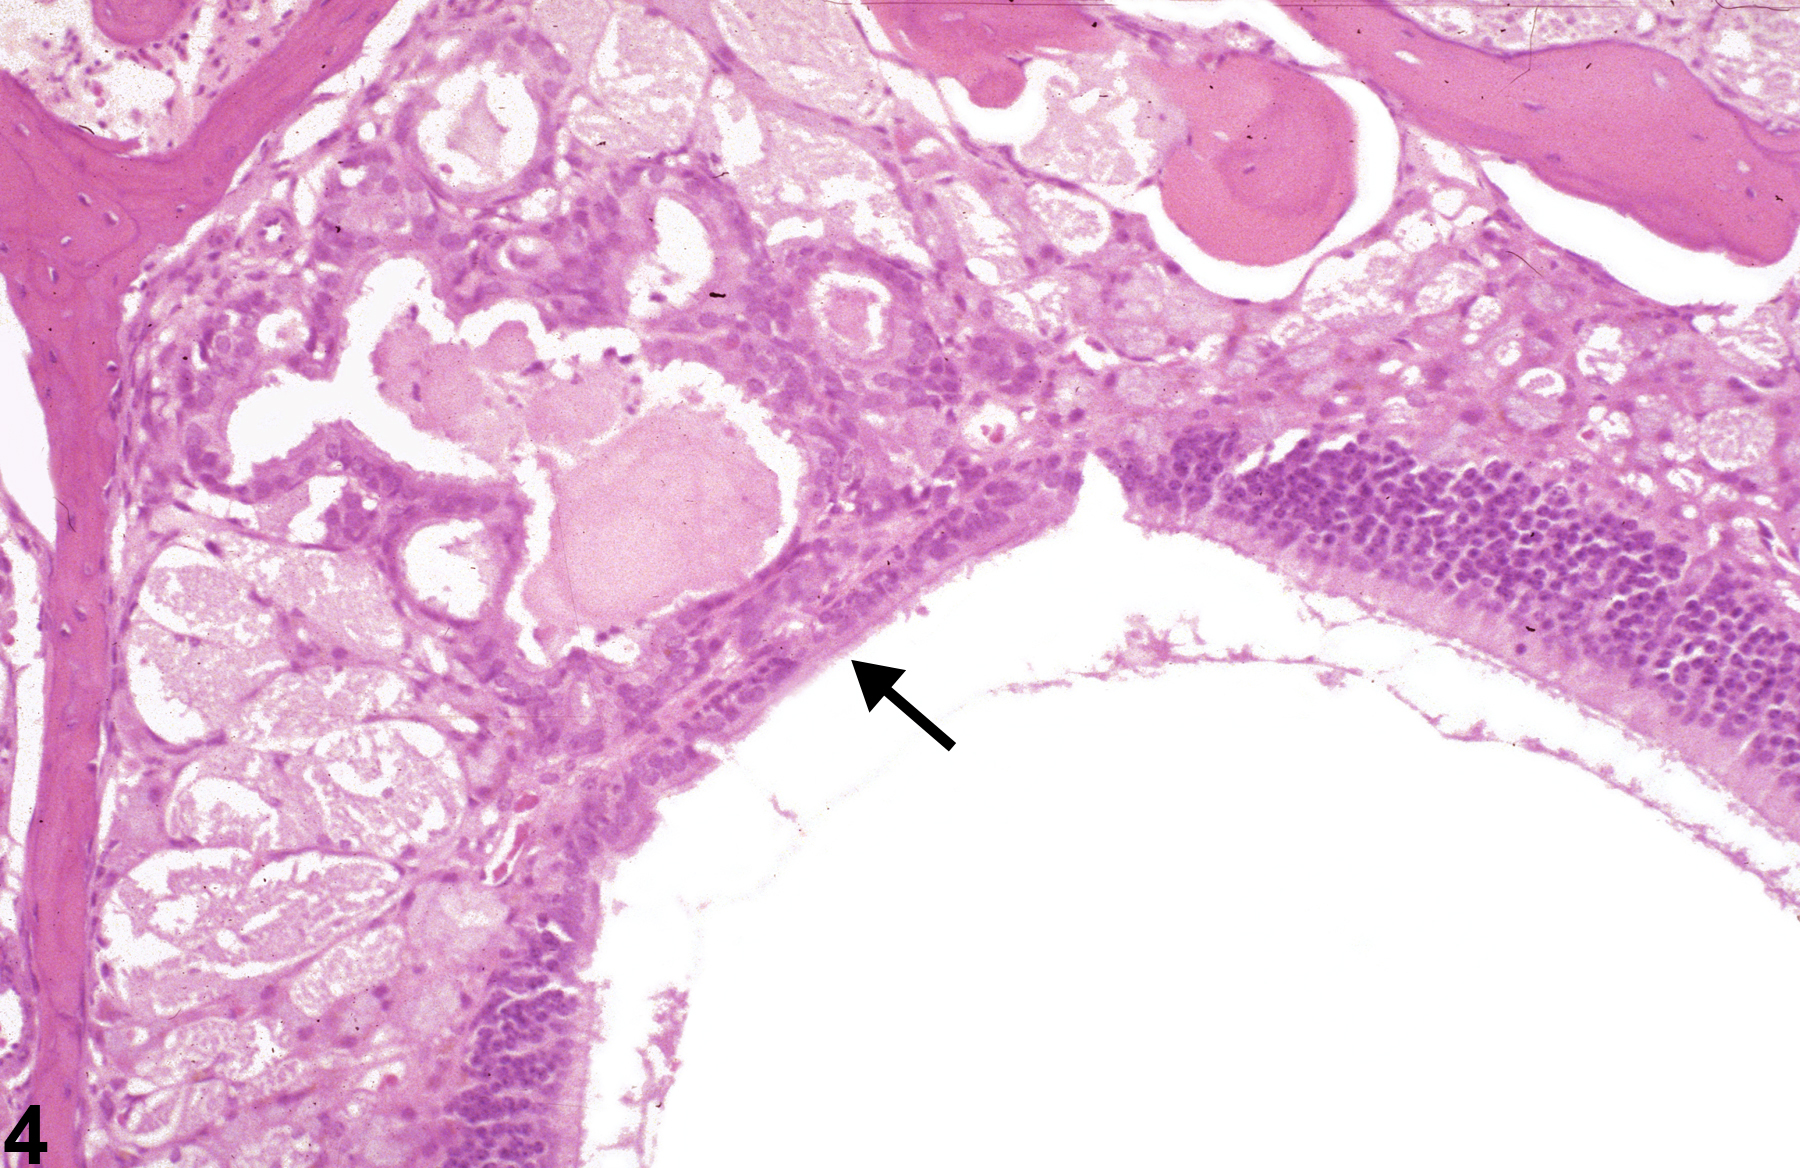 Image of metaplasia, respiratory in the nose, olfactory epithelium from a  B6C3F1/N mouse in a chronic study